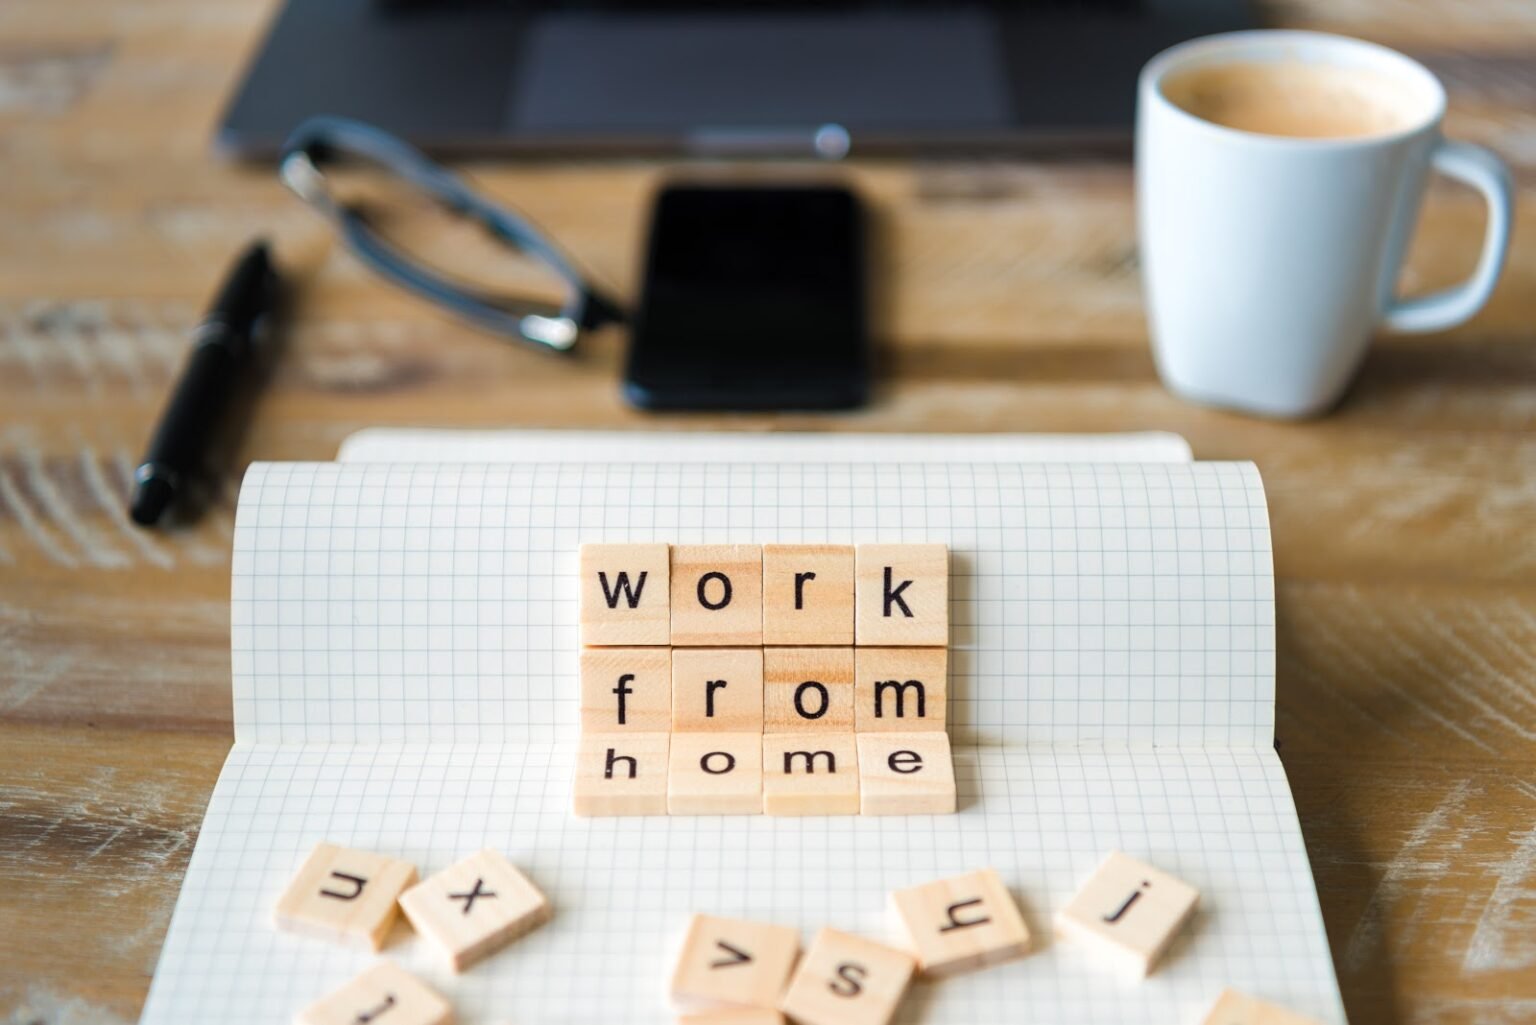 work from home habits for better mental health